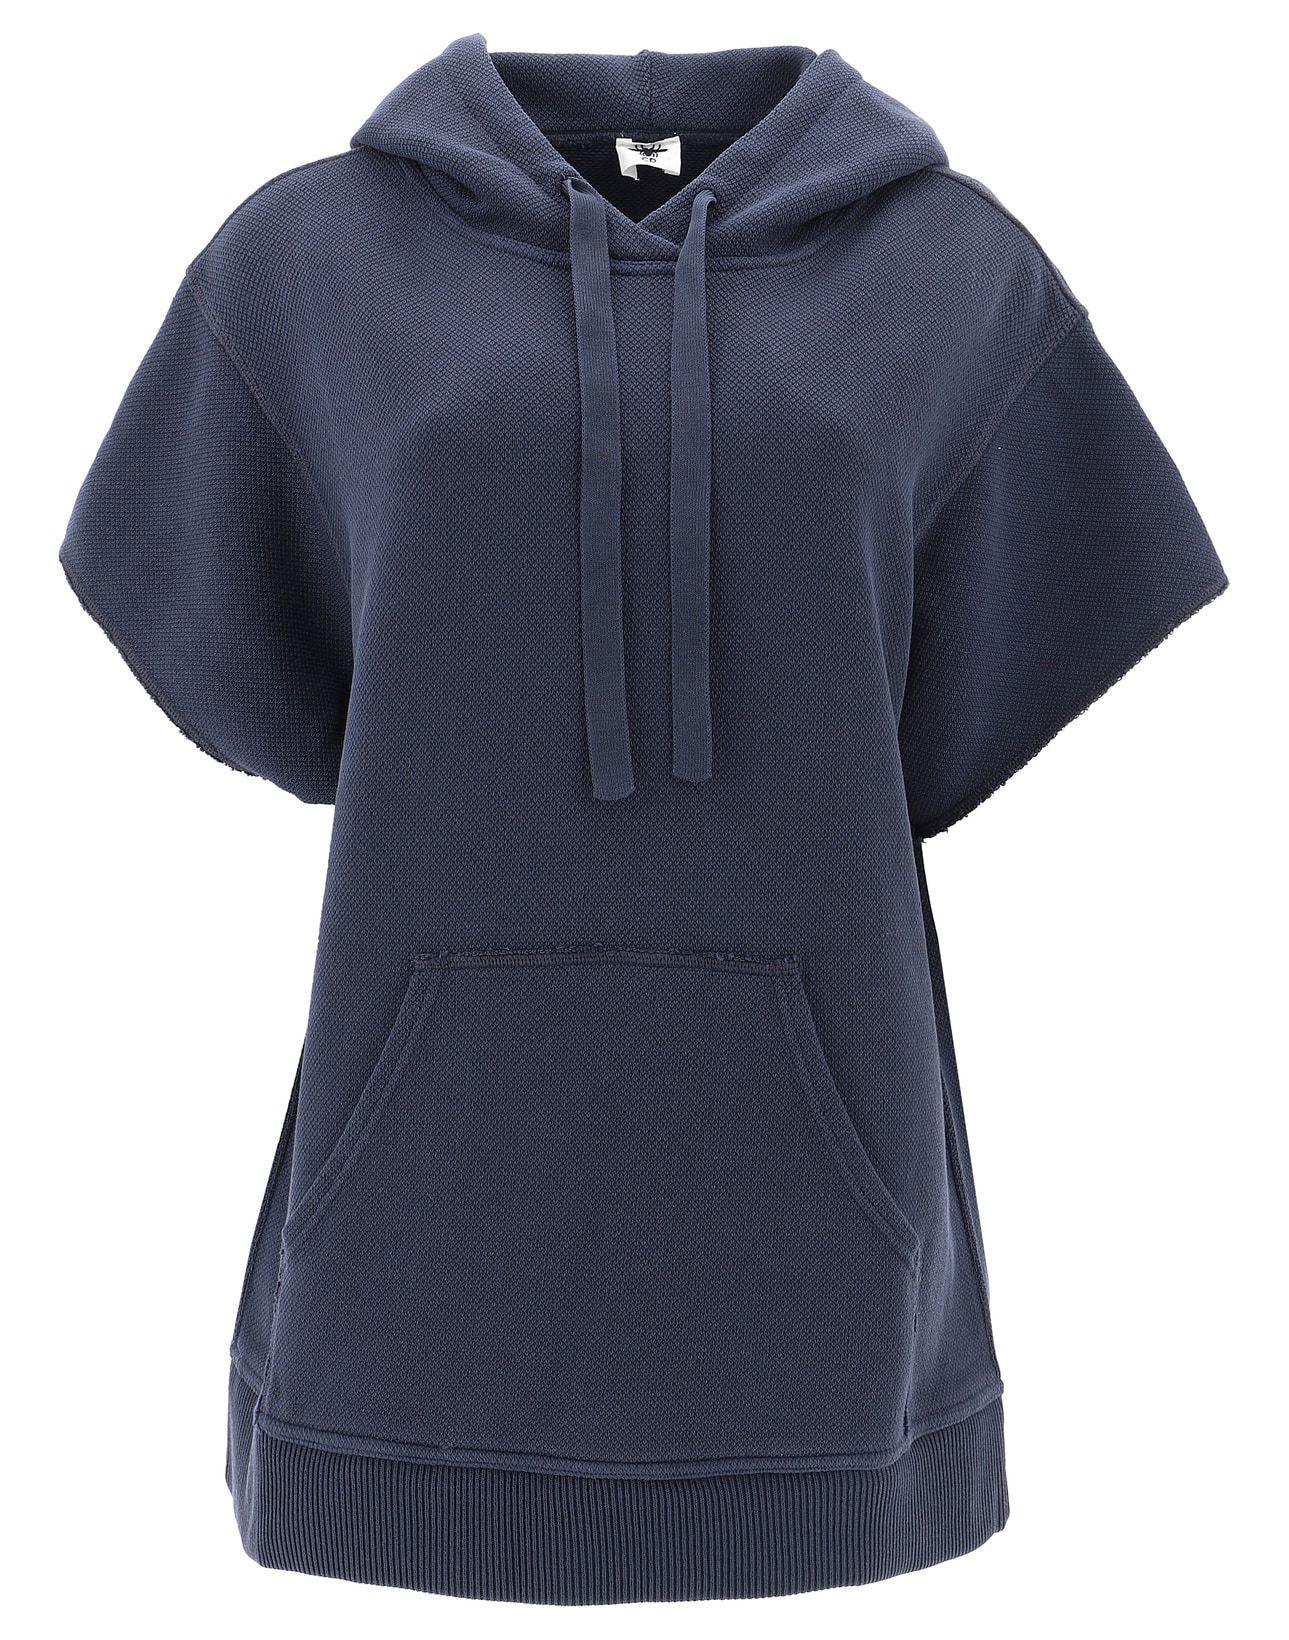 Dior Cotton Lucky Hooded Sweatshirt in Blue - Save 14% - Lyst